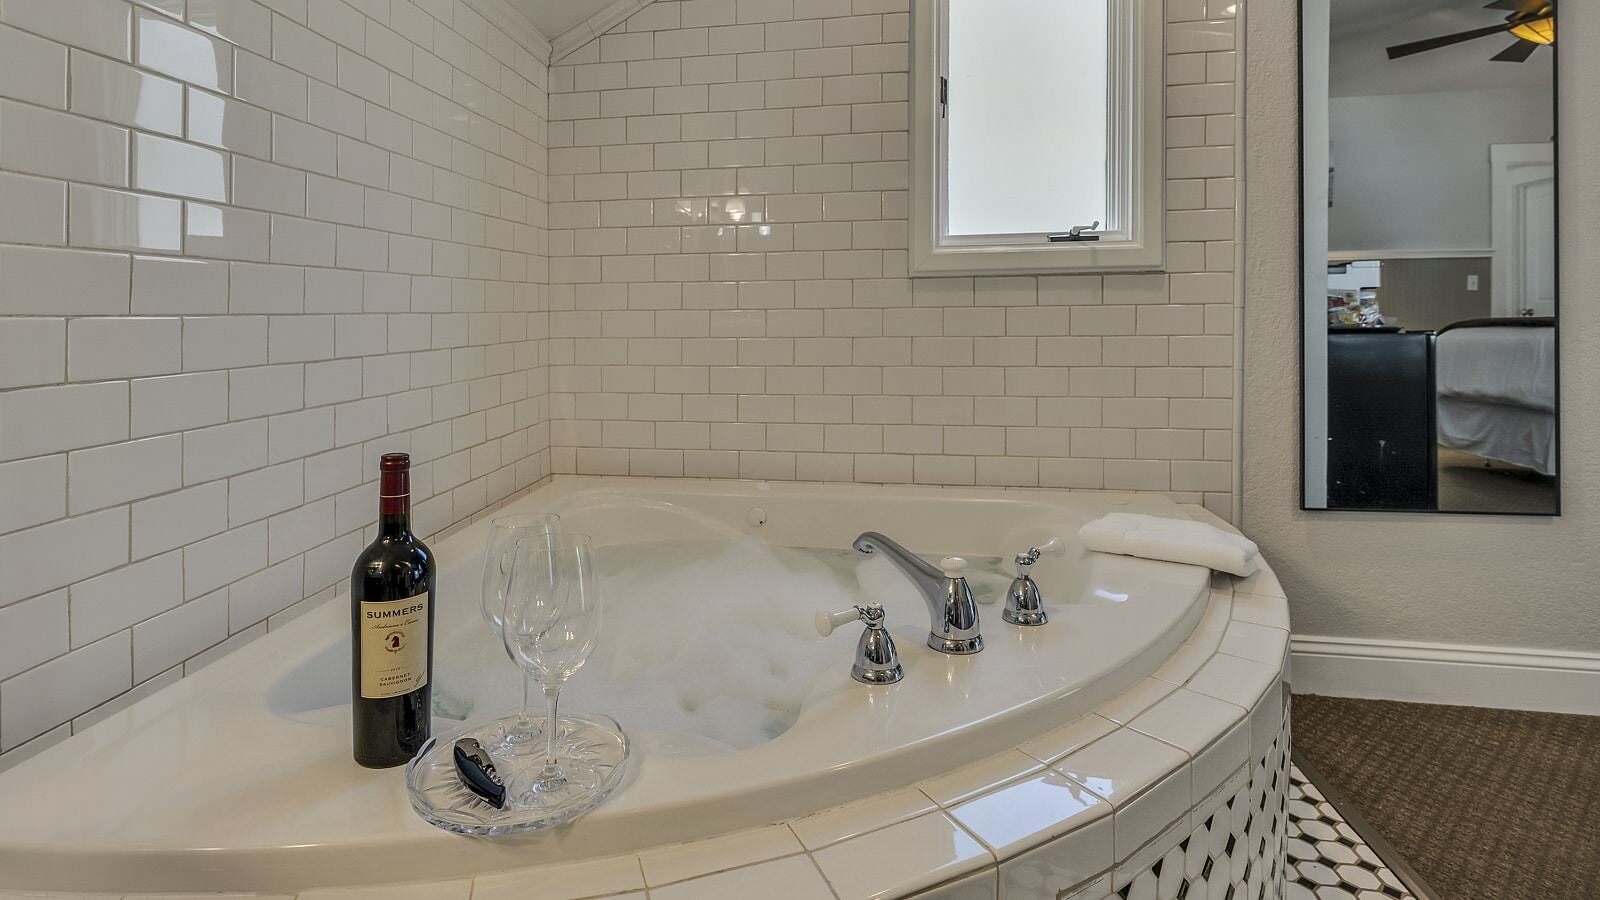 Two wine glasses on glass tray next to bottle of red wine on top of soaker tub surrounded by white tile